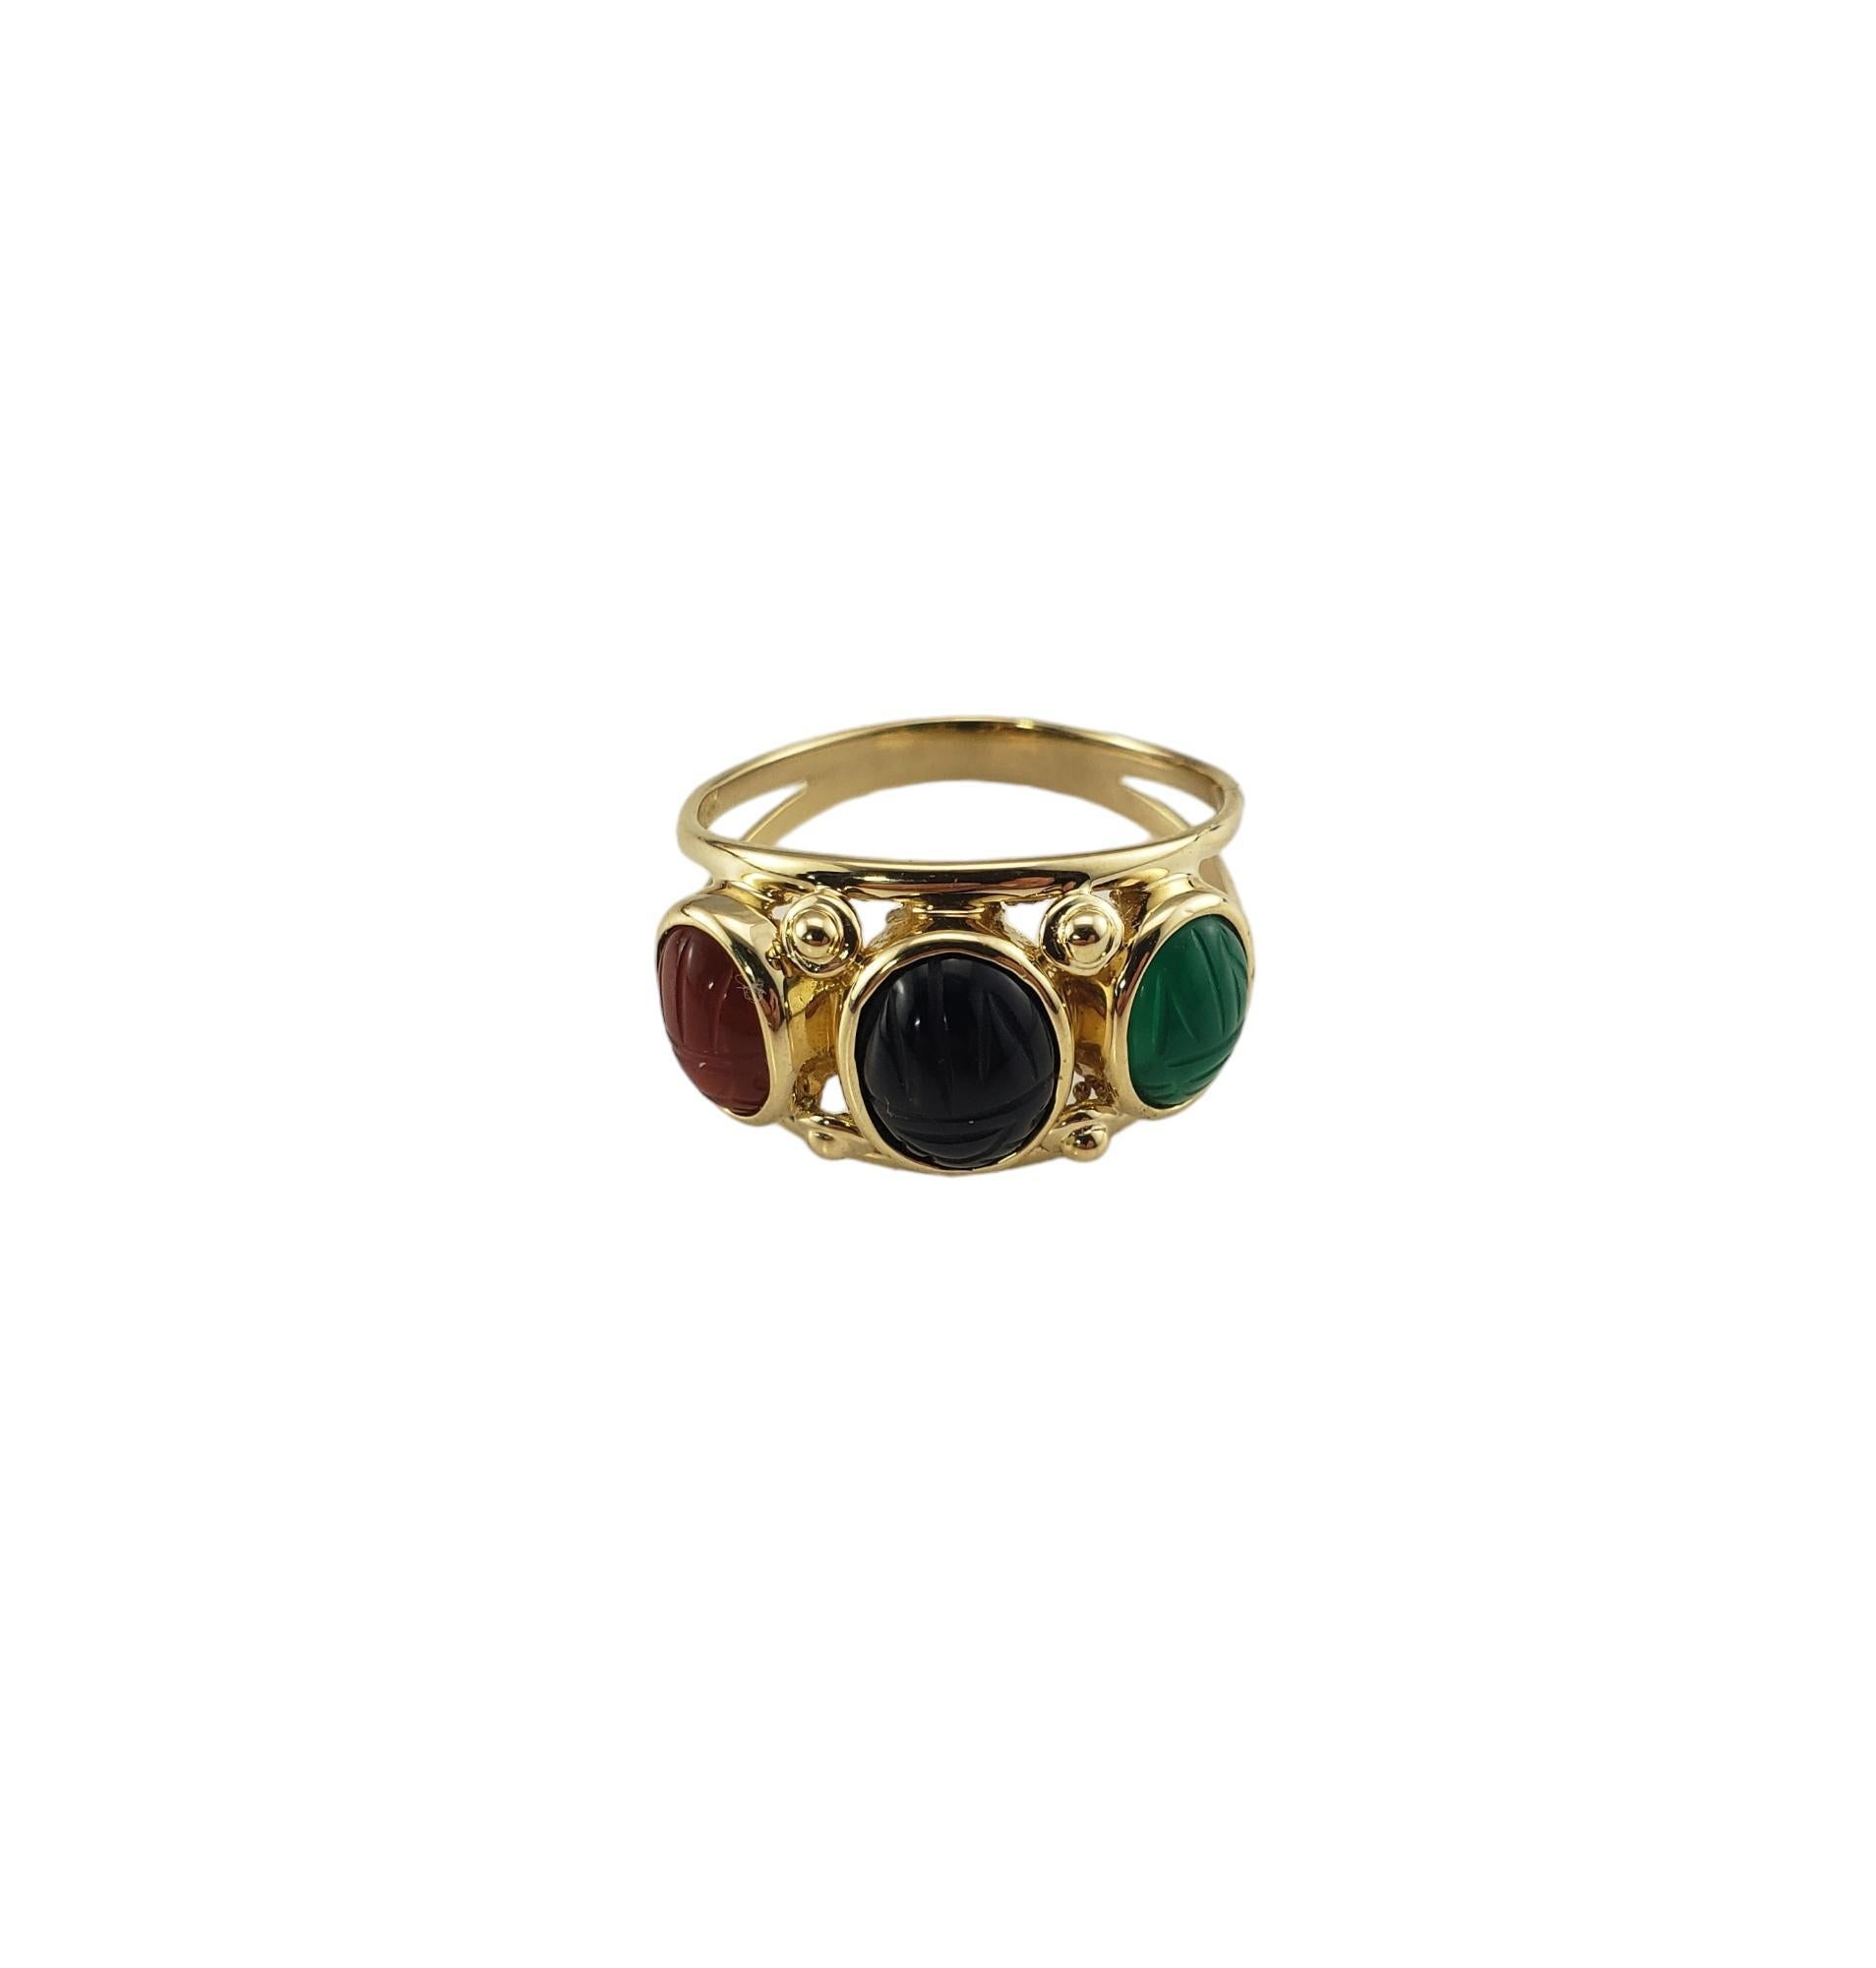 Vintage 14K Yellow Gold Scarab Ring Size 9.75-10

This elegant ring features three oval carved scarab design stones (carnelian, onyx, jade) set in beautifully detailed 14K yellow gold. 

 Width:  13 mm.  

Shank: 3 mm.

Ring Size: 9.75-10

Stamped: